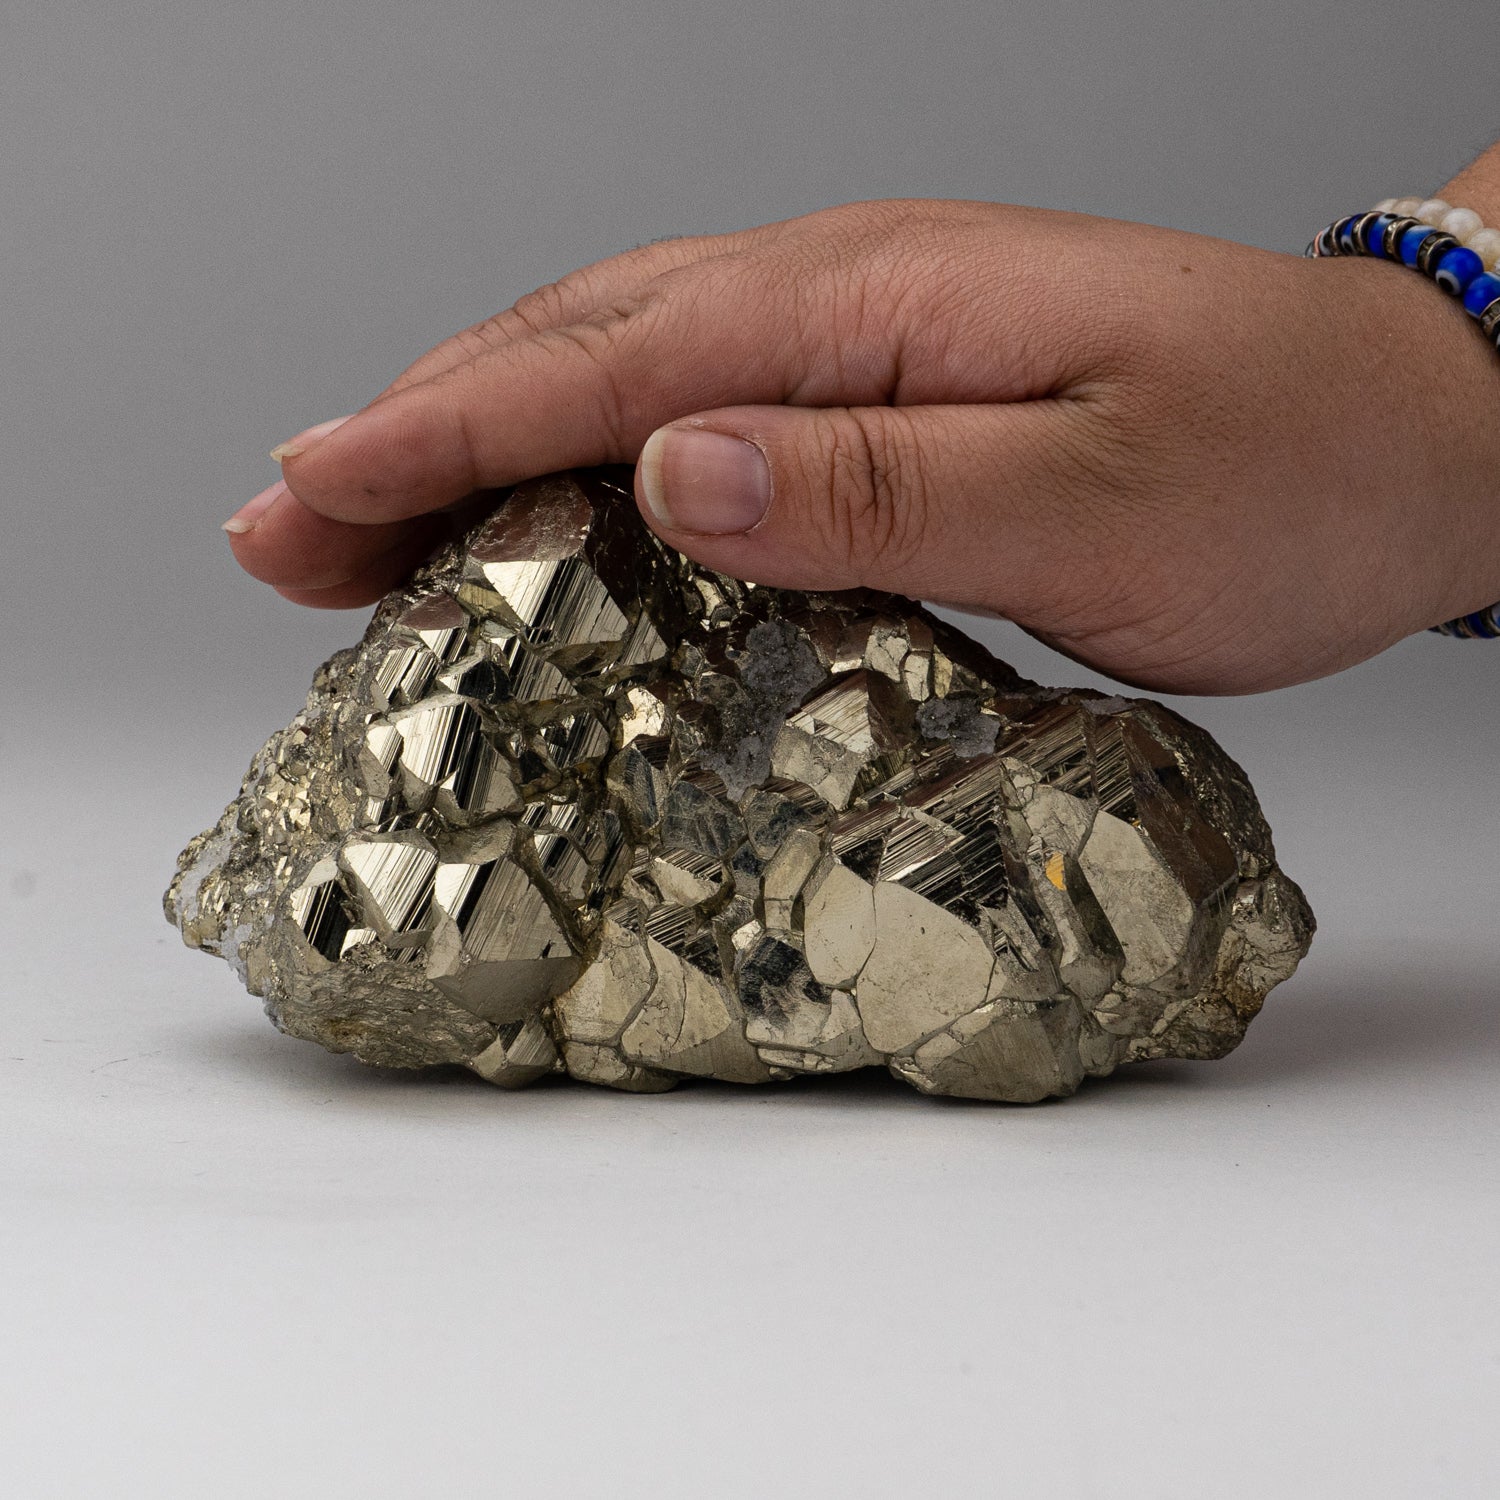 Pyrite Cluster from Huanuco Province, Peru (3.6 lbs)